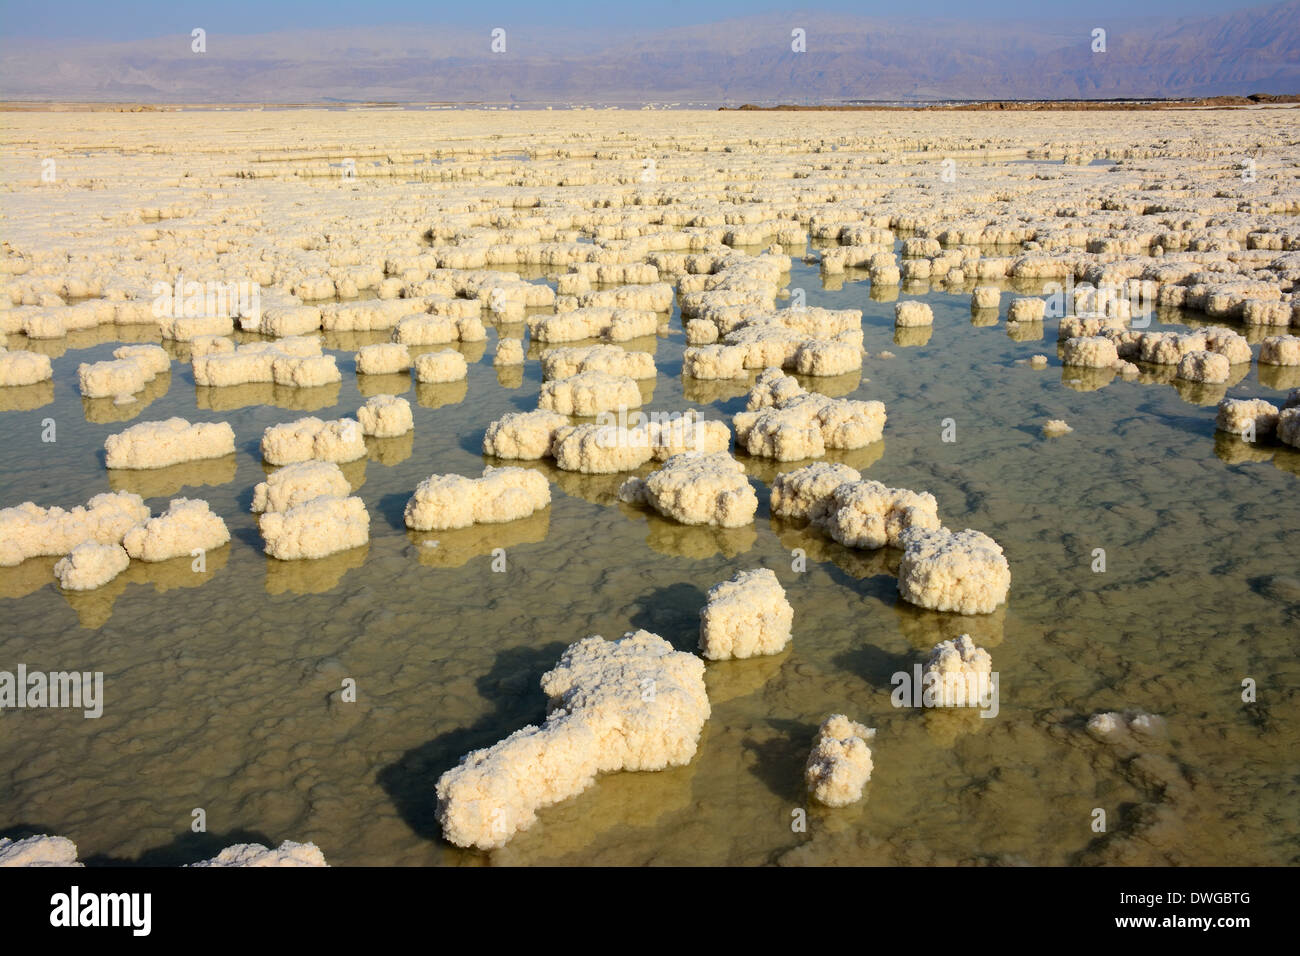 Salt Formations In The Dead Sea Israel Stock Photo Alamy